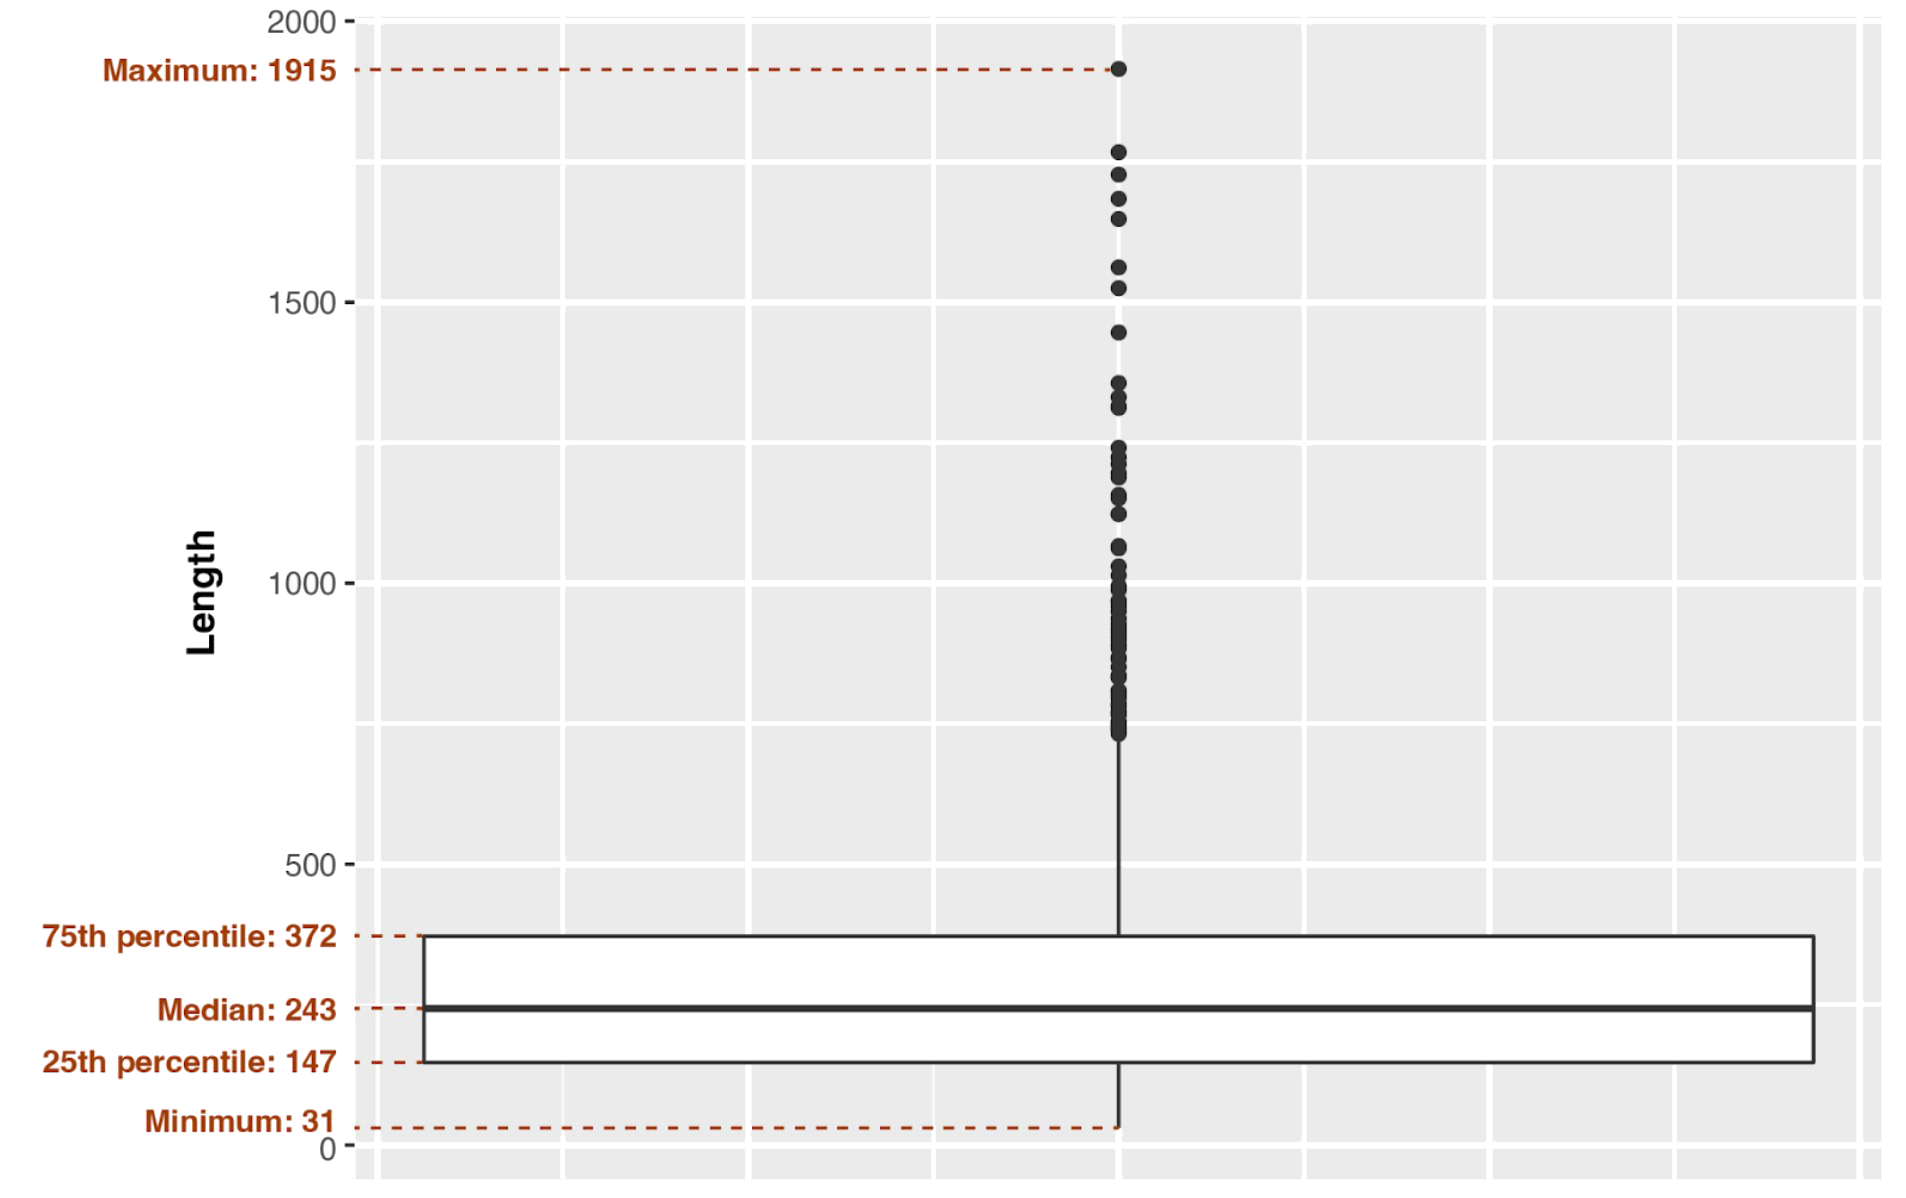 Descriptive statistical parameters of protein length distribution shown on the box plot